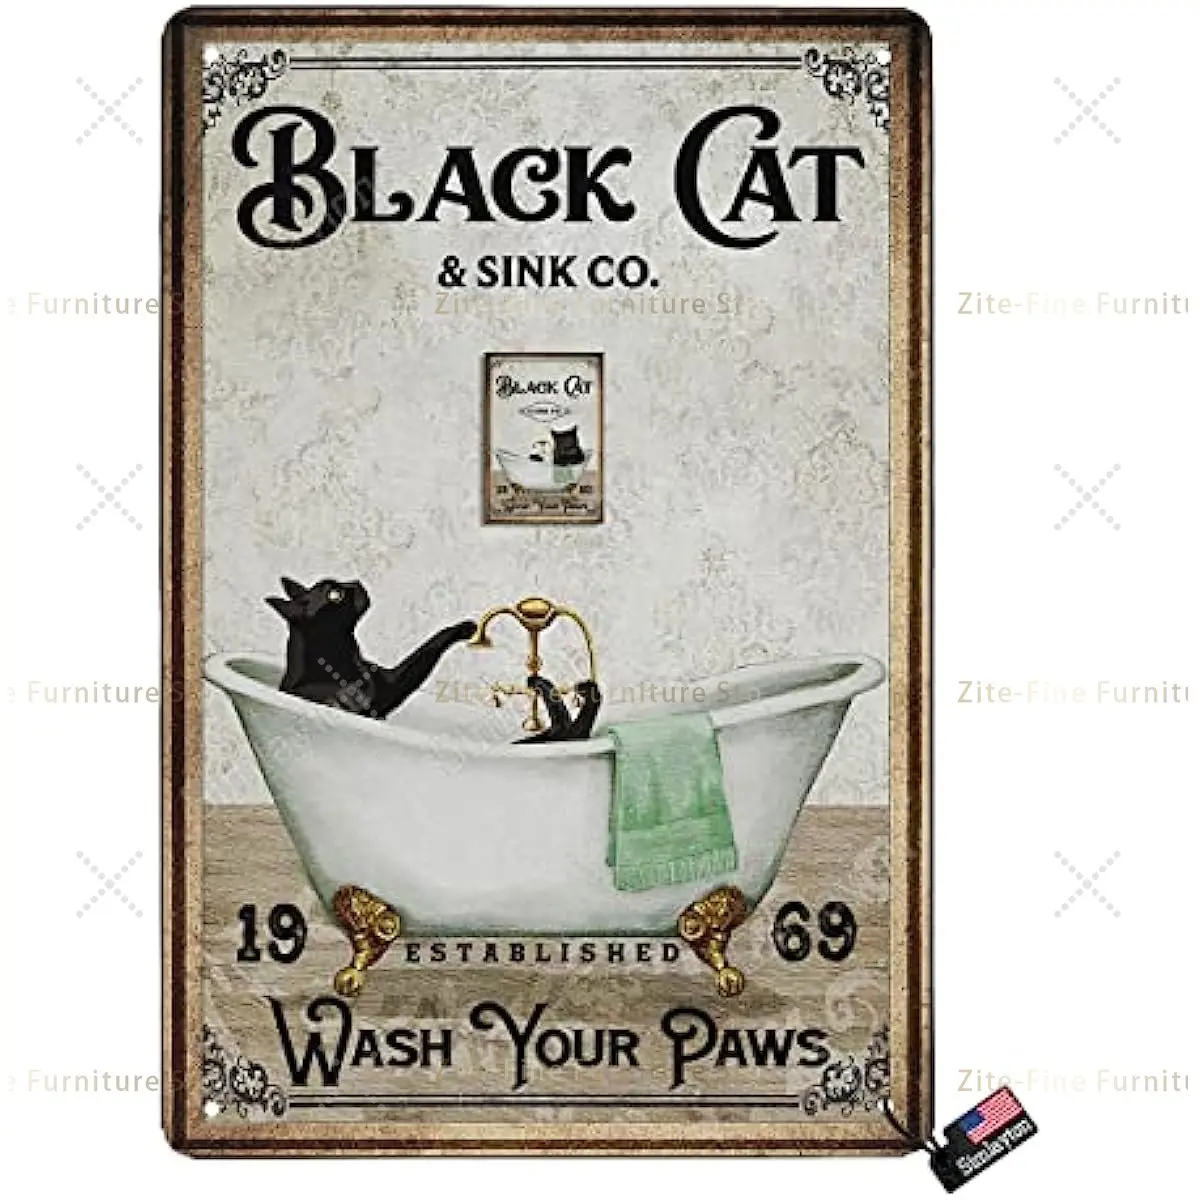 

Wall Decor - Tin Sign, Funny Black Cat Pattern - Bathroom Use, Vintage Style - Toilet Use, Wash Your Paws, 8"x12"